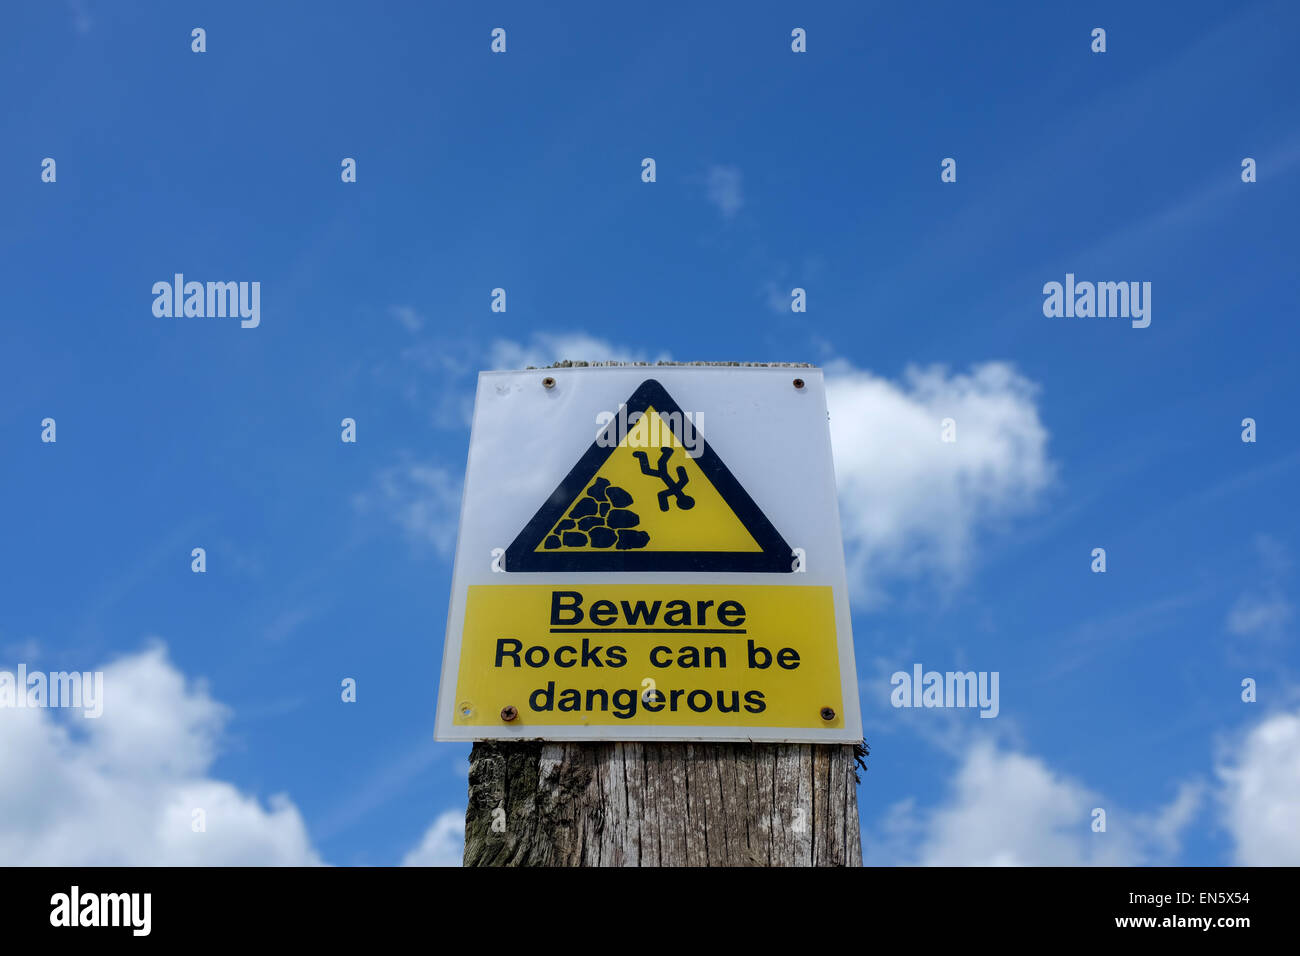 Rocks can be dangerous warning sign Stock Photo